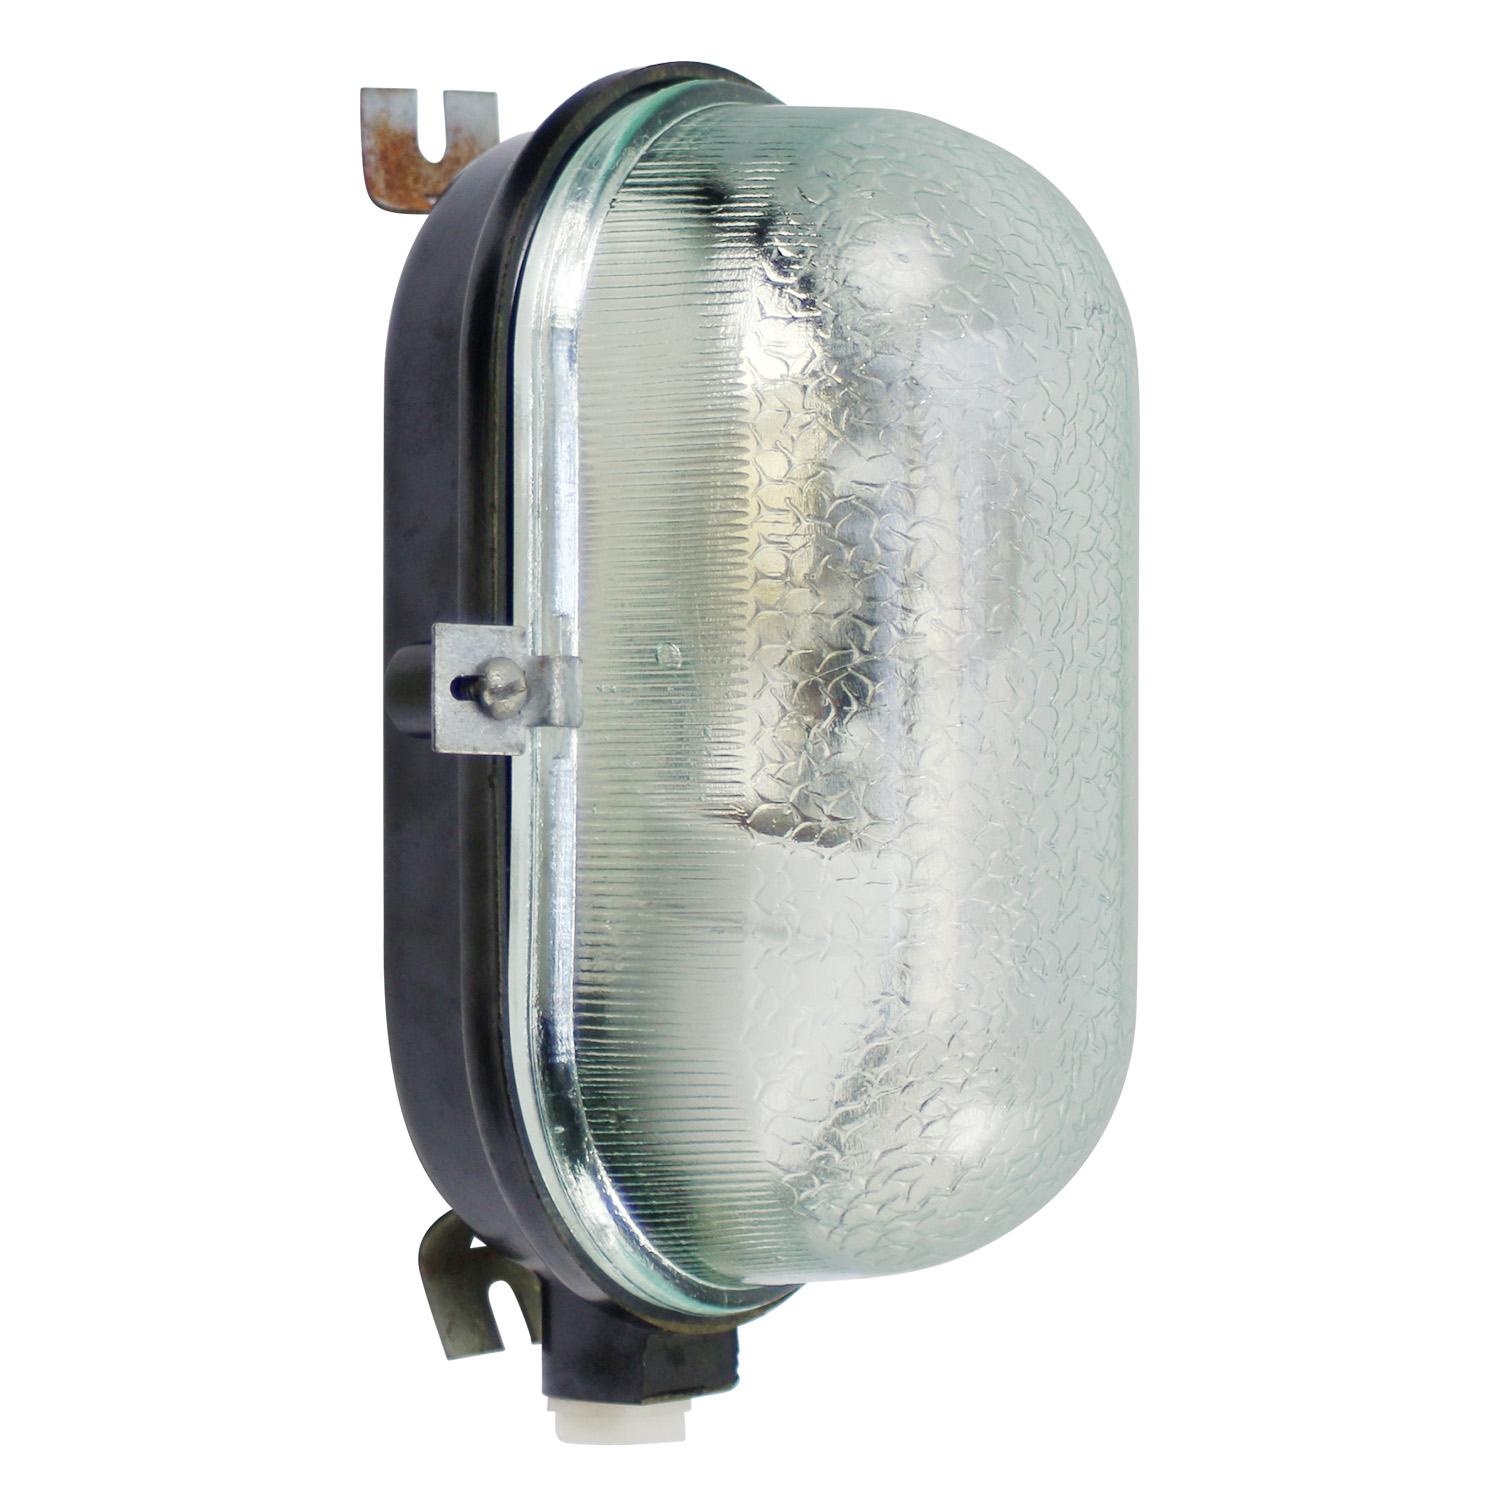 Industrial wall or ceiling lamp
Black Bakelite, clear structured glass

Weight: 0.70 kg / 1.5 lb

Priced per individual item. All lamps have been made suitable by international standards for incandescent light bulbs, energy-efficient and LED bulbs.